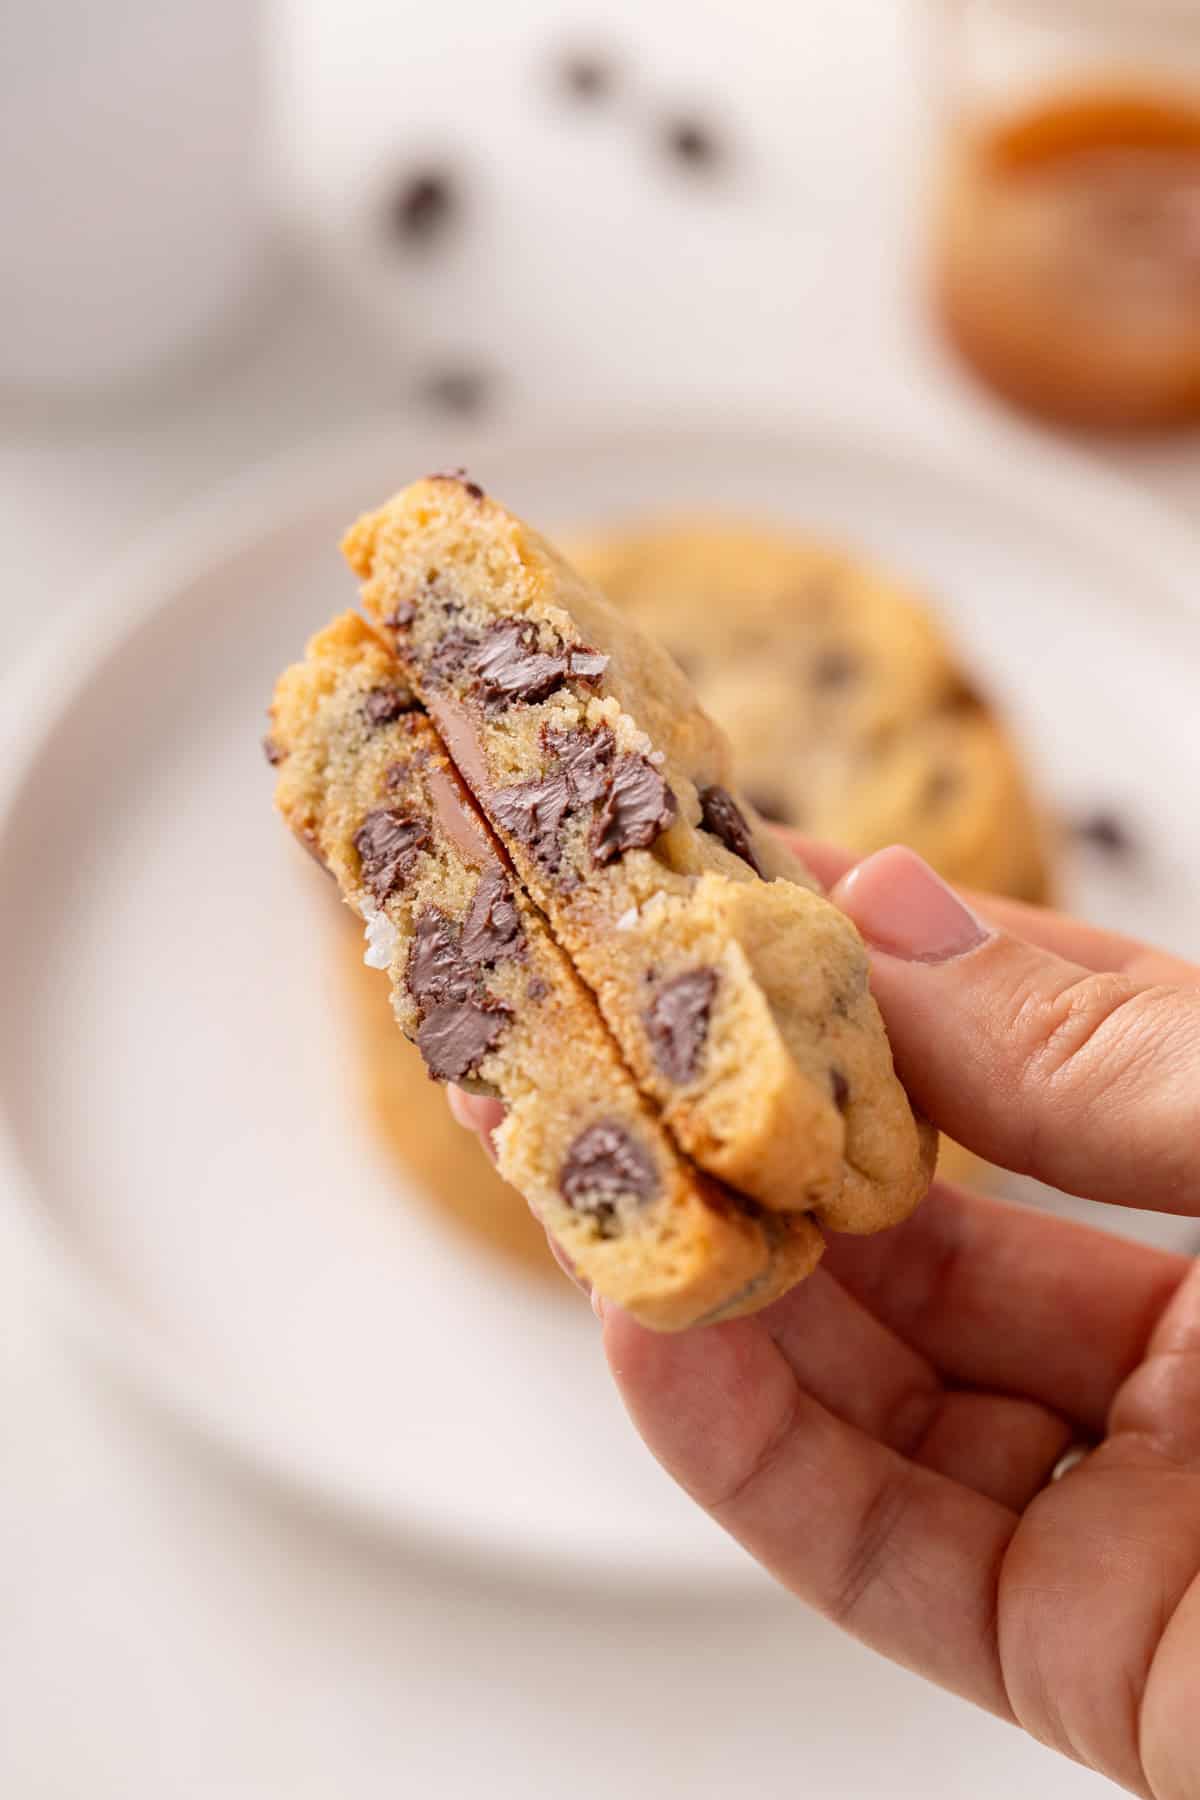 Hand holding up a halved salted caramel chocolate chip cookie.